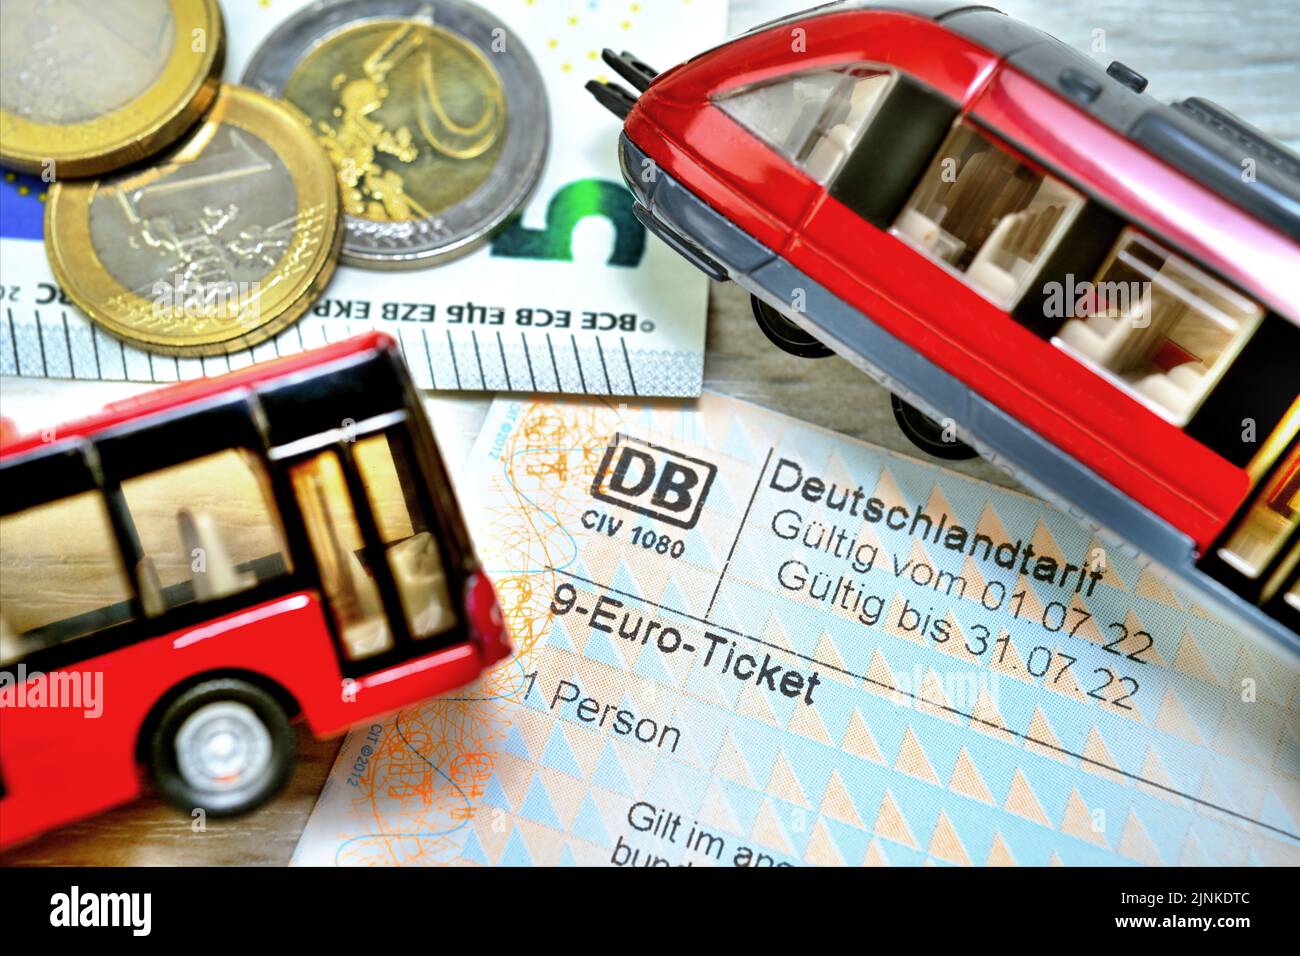 Nine-euro Ticket With Train And Bus Model Stock Photo